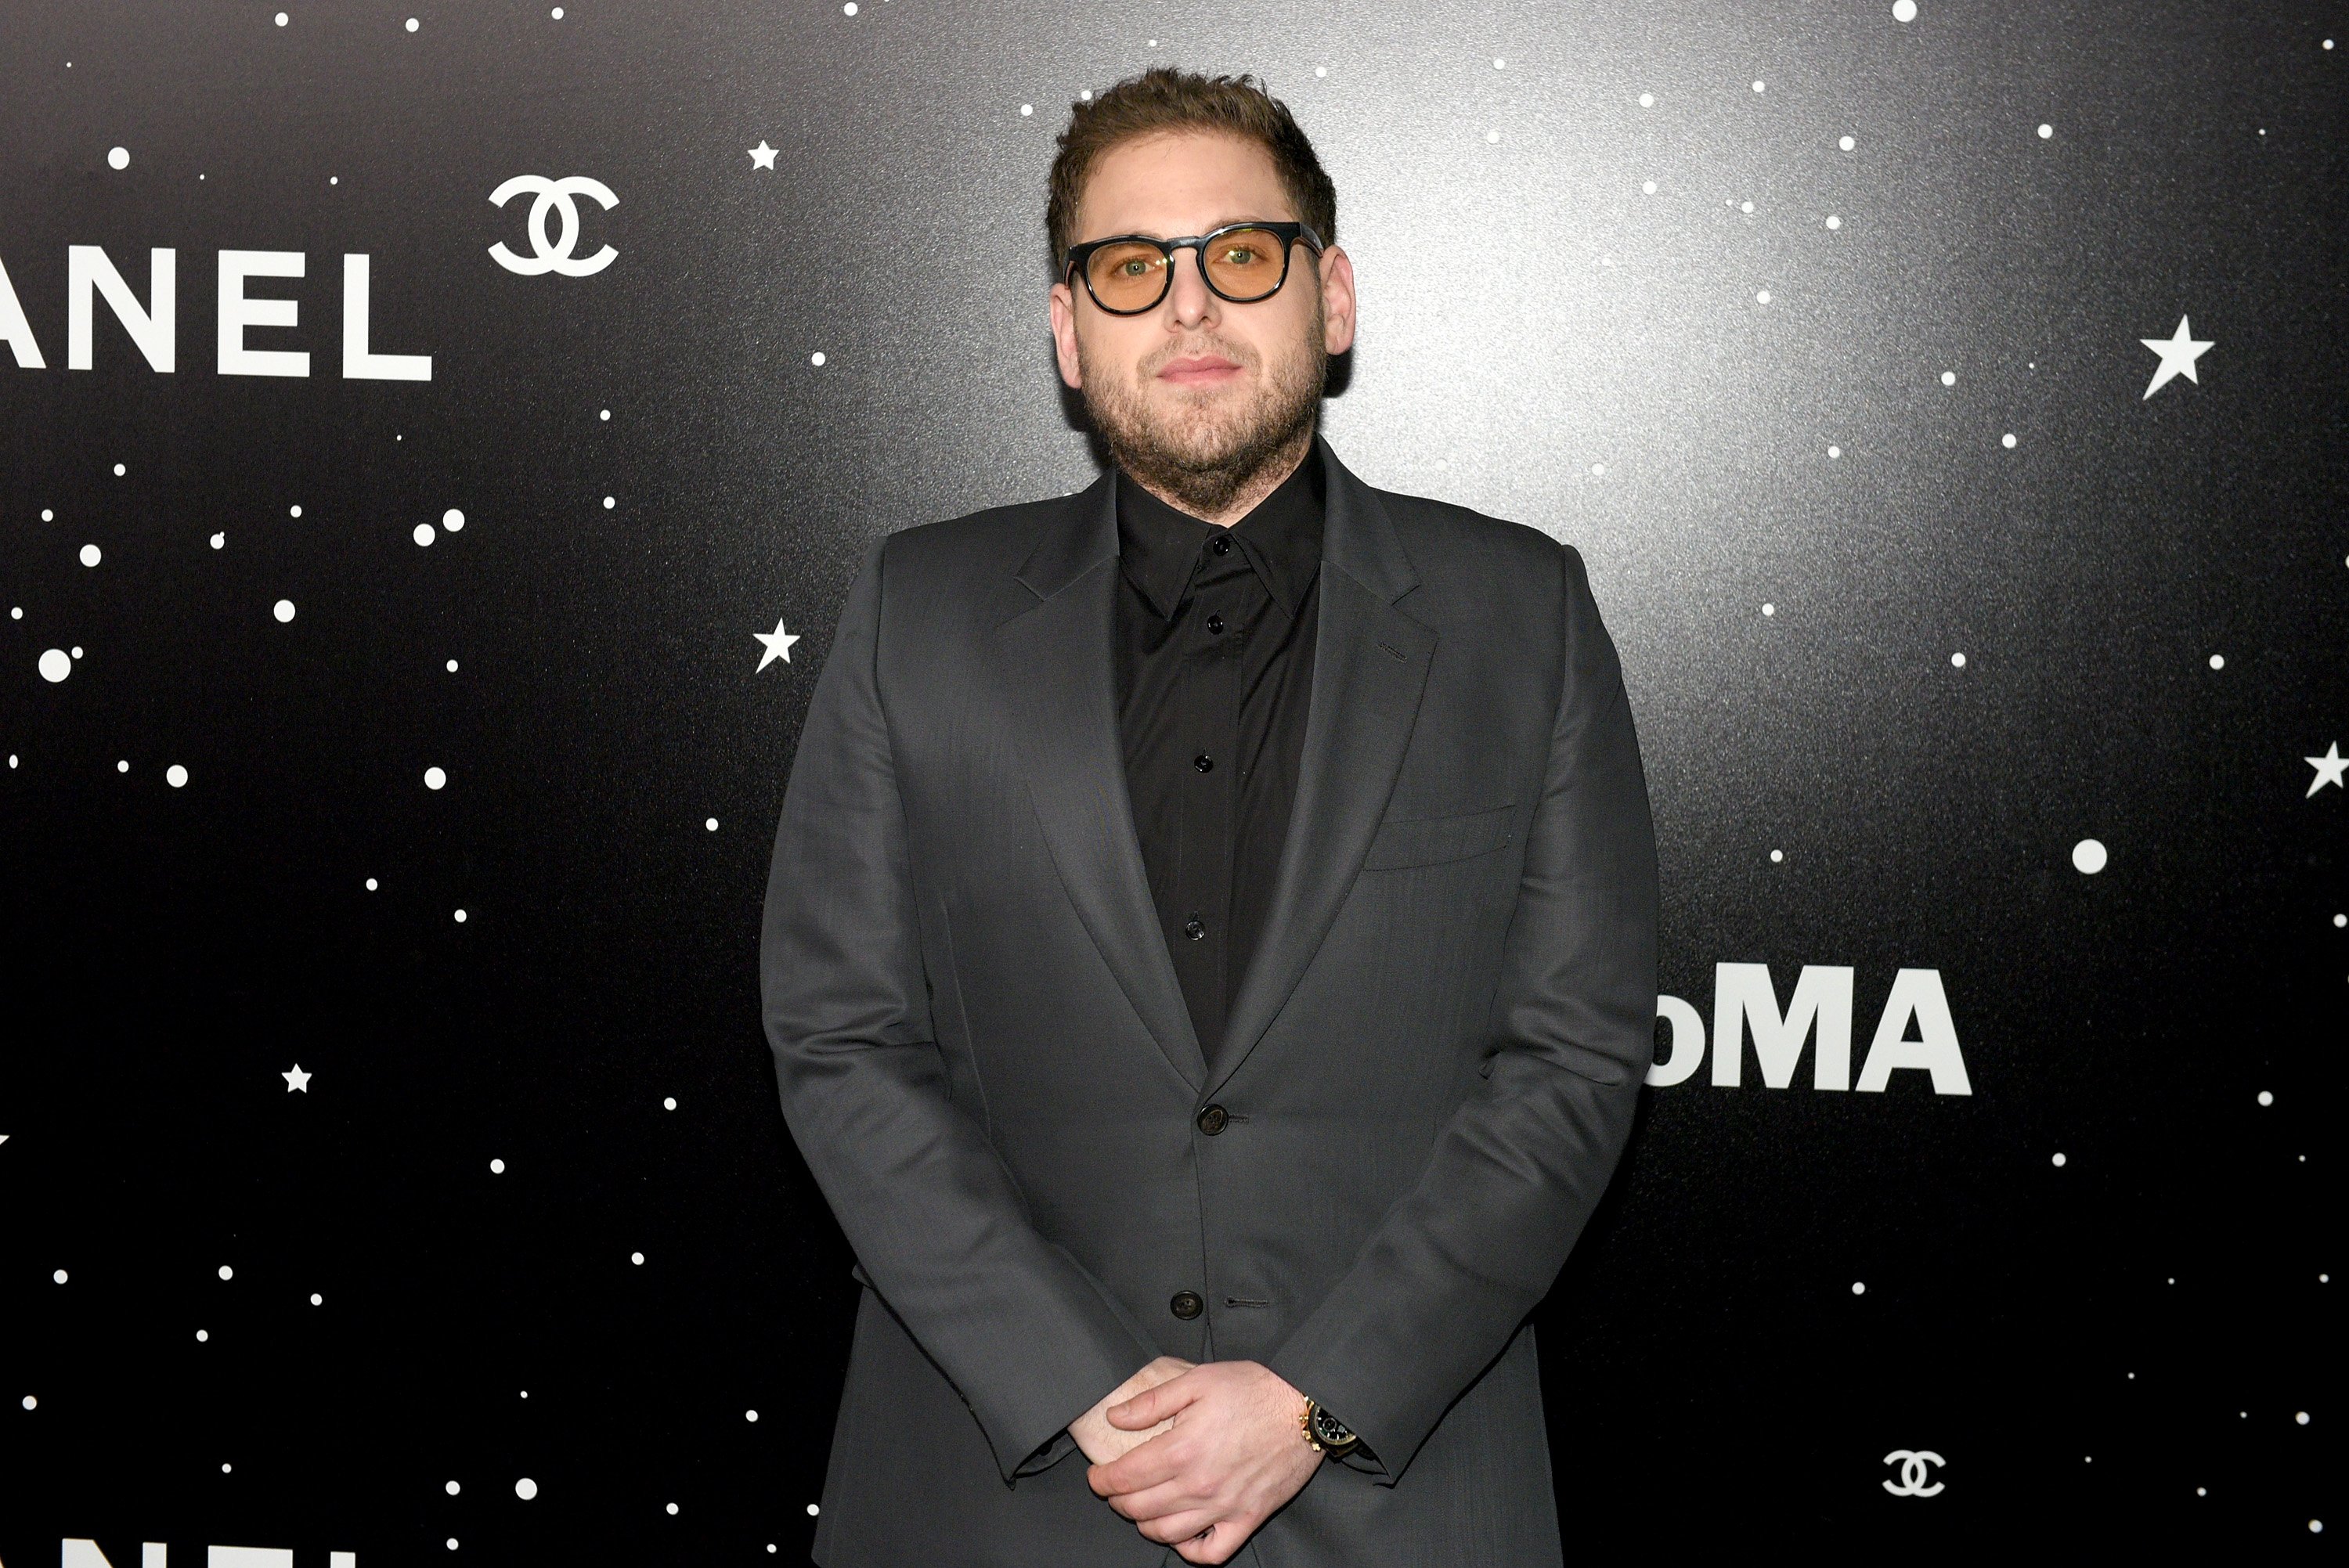 Jonah Hill at The Museum Of Modern Art Film Benefit in New York City on November 19, 2018. | Source: Getty Images